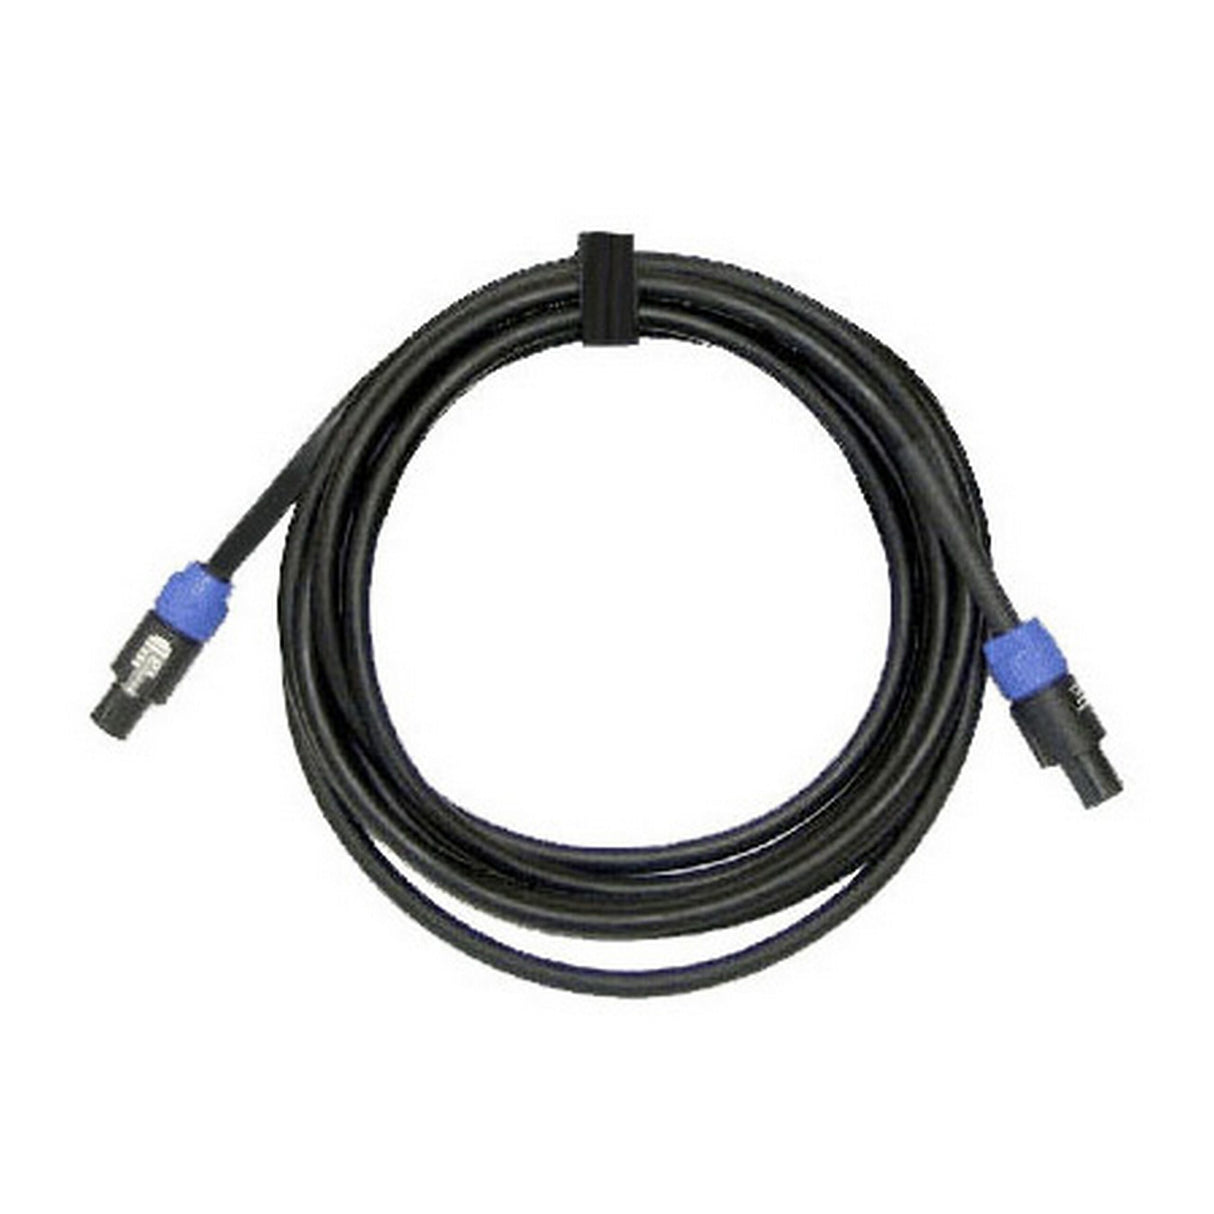 Whirlwind NL4-050 12 AWG NL4 to NL4 Speakon Speaker Cable 50, Foot